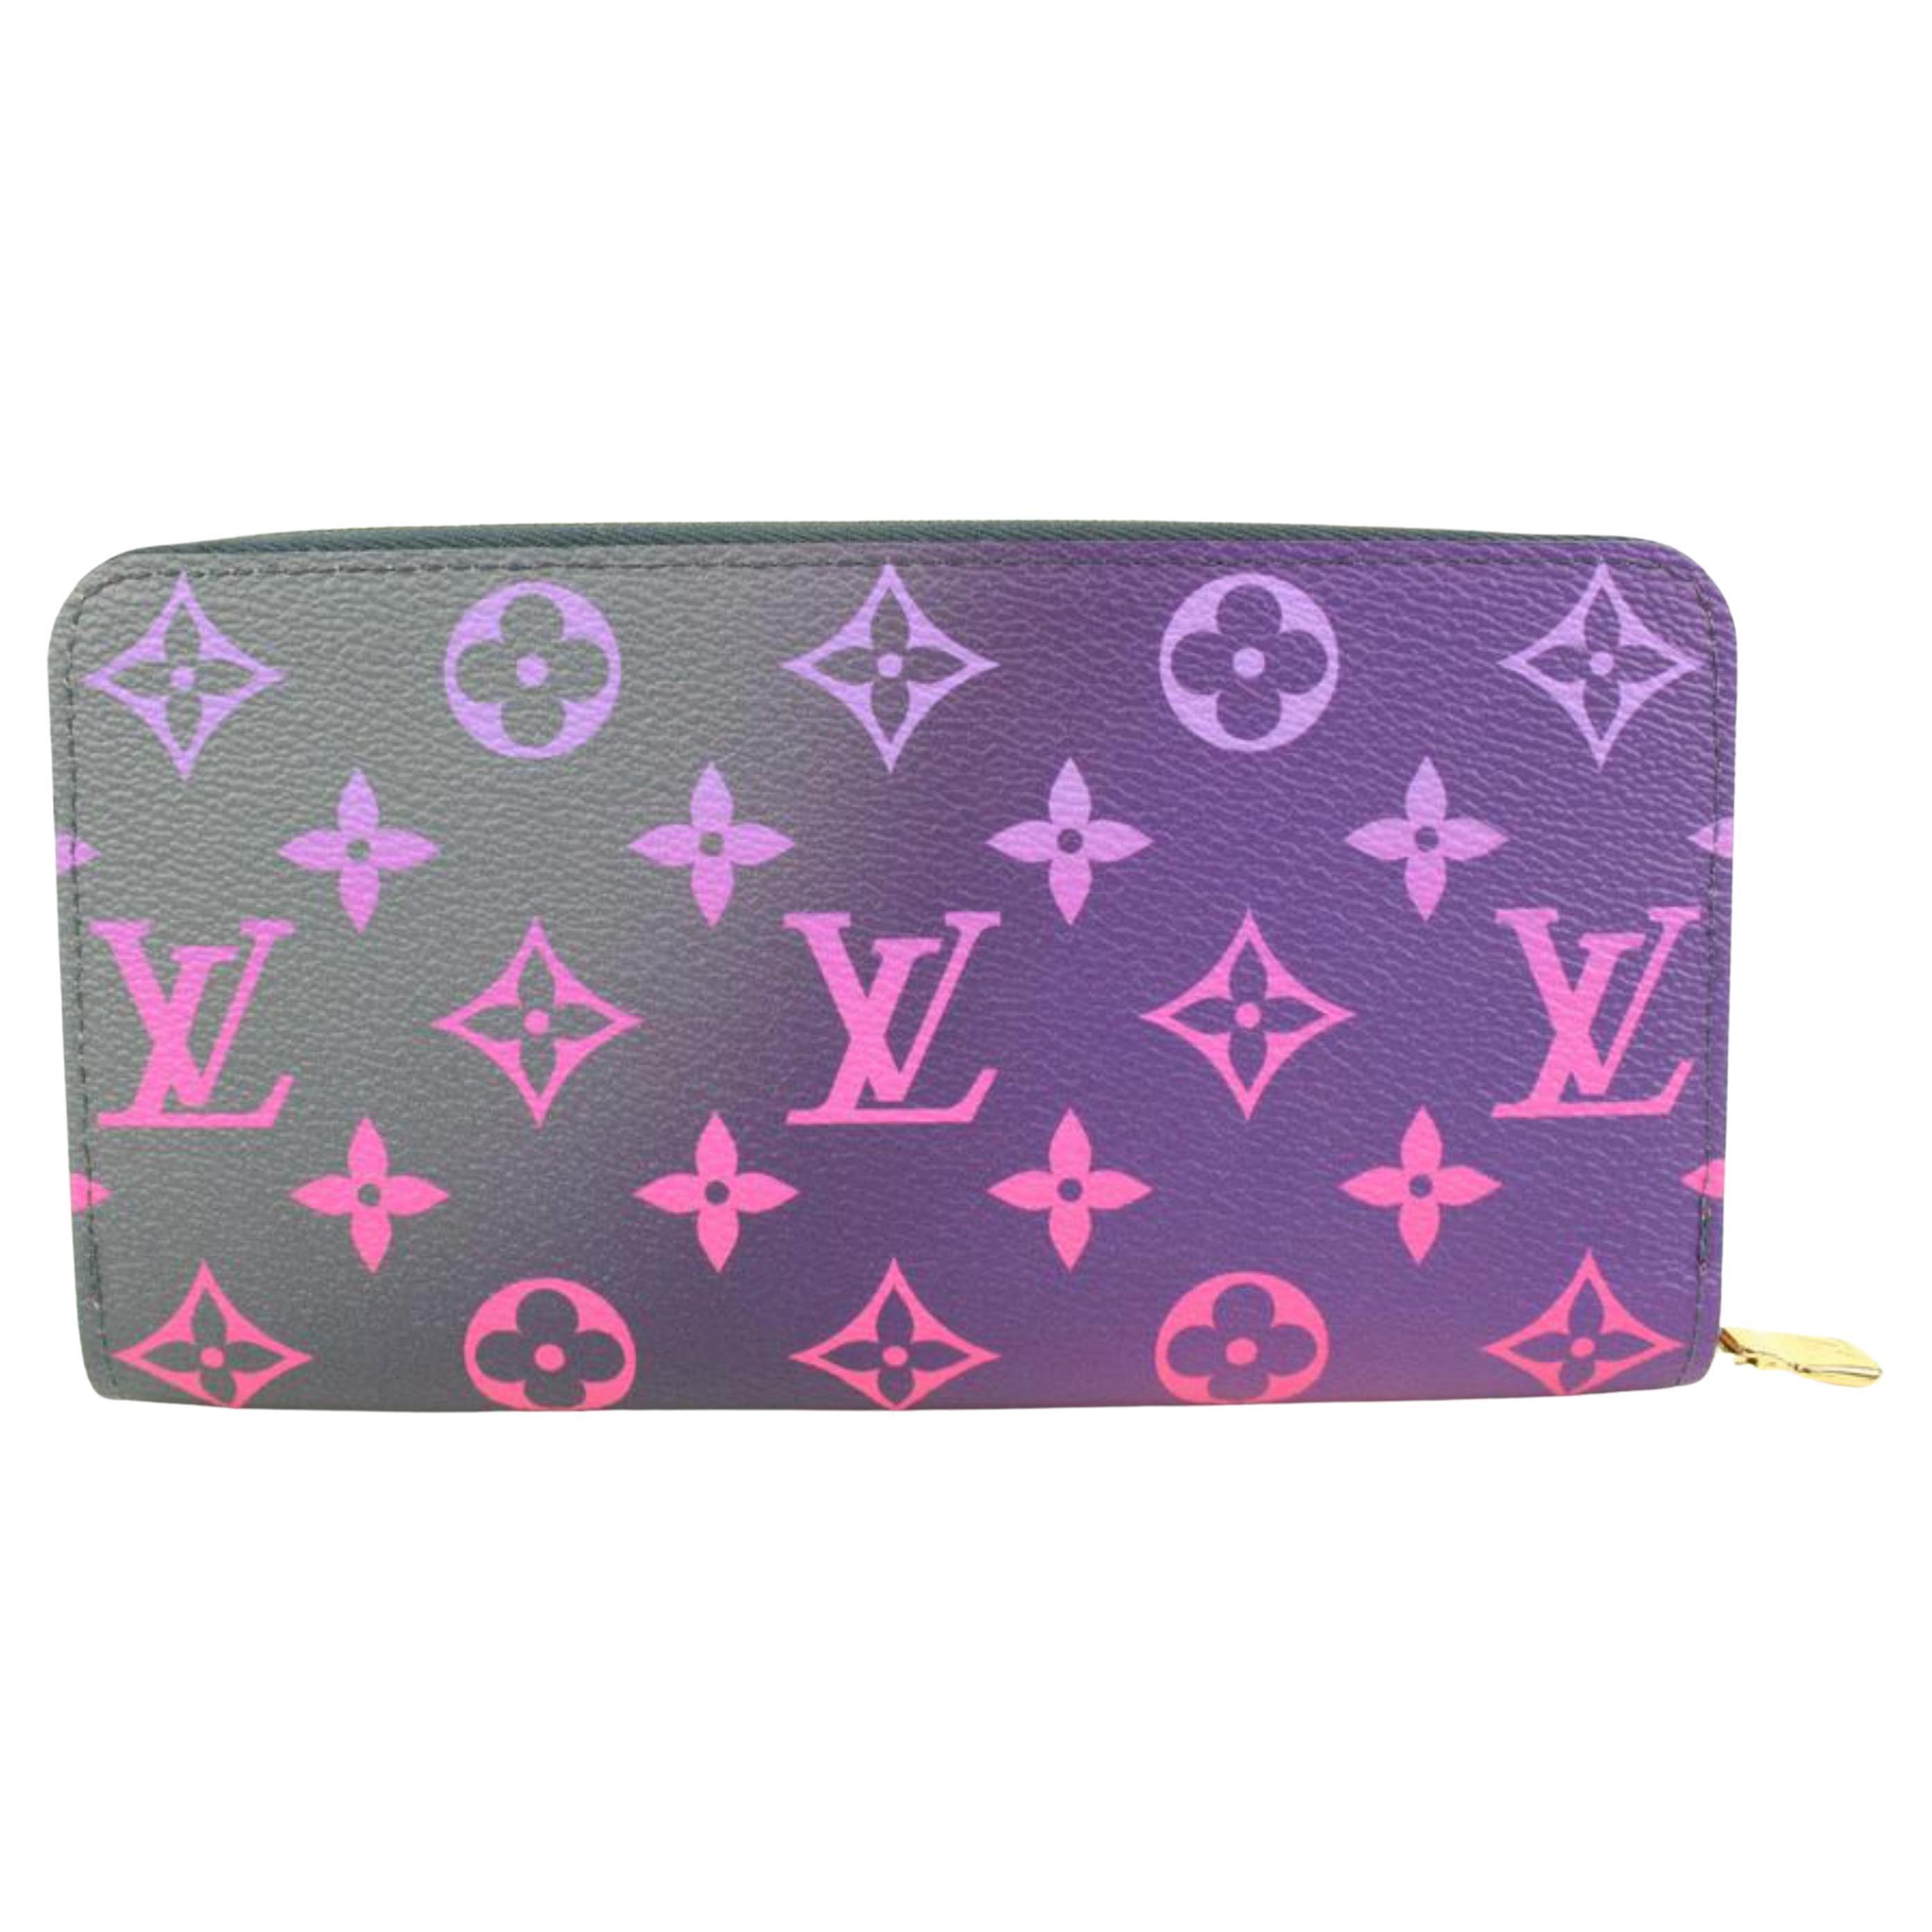 LOUIS VUITTON Monogram Zippy Wallet Zip Around purse use as is or for parts